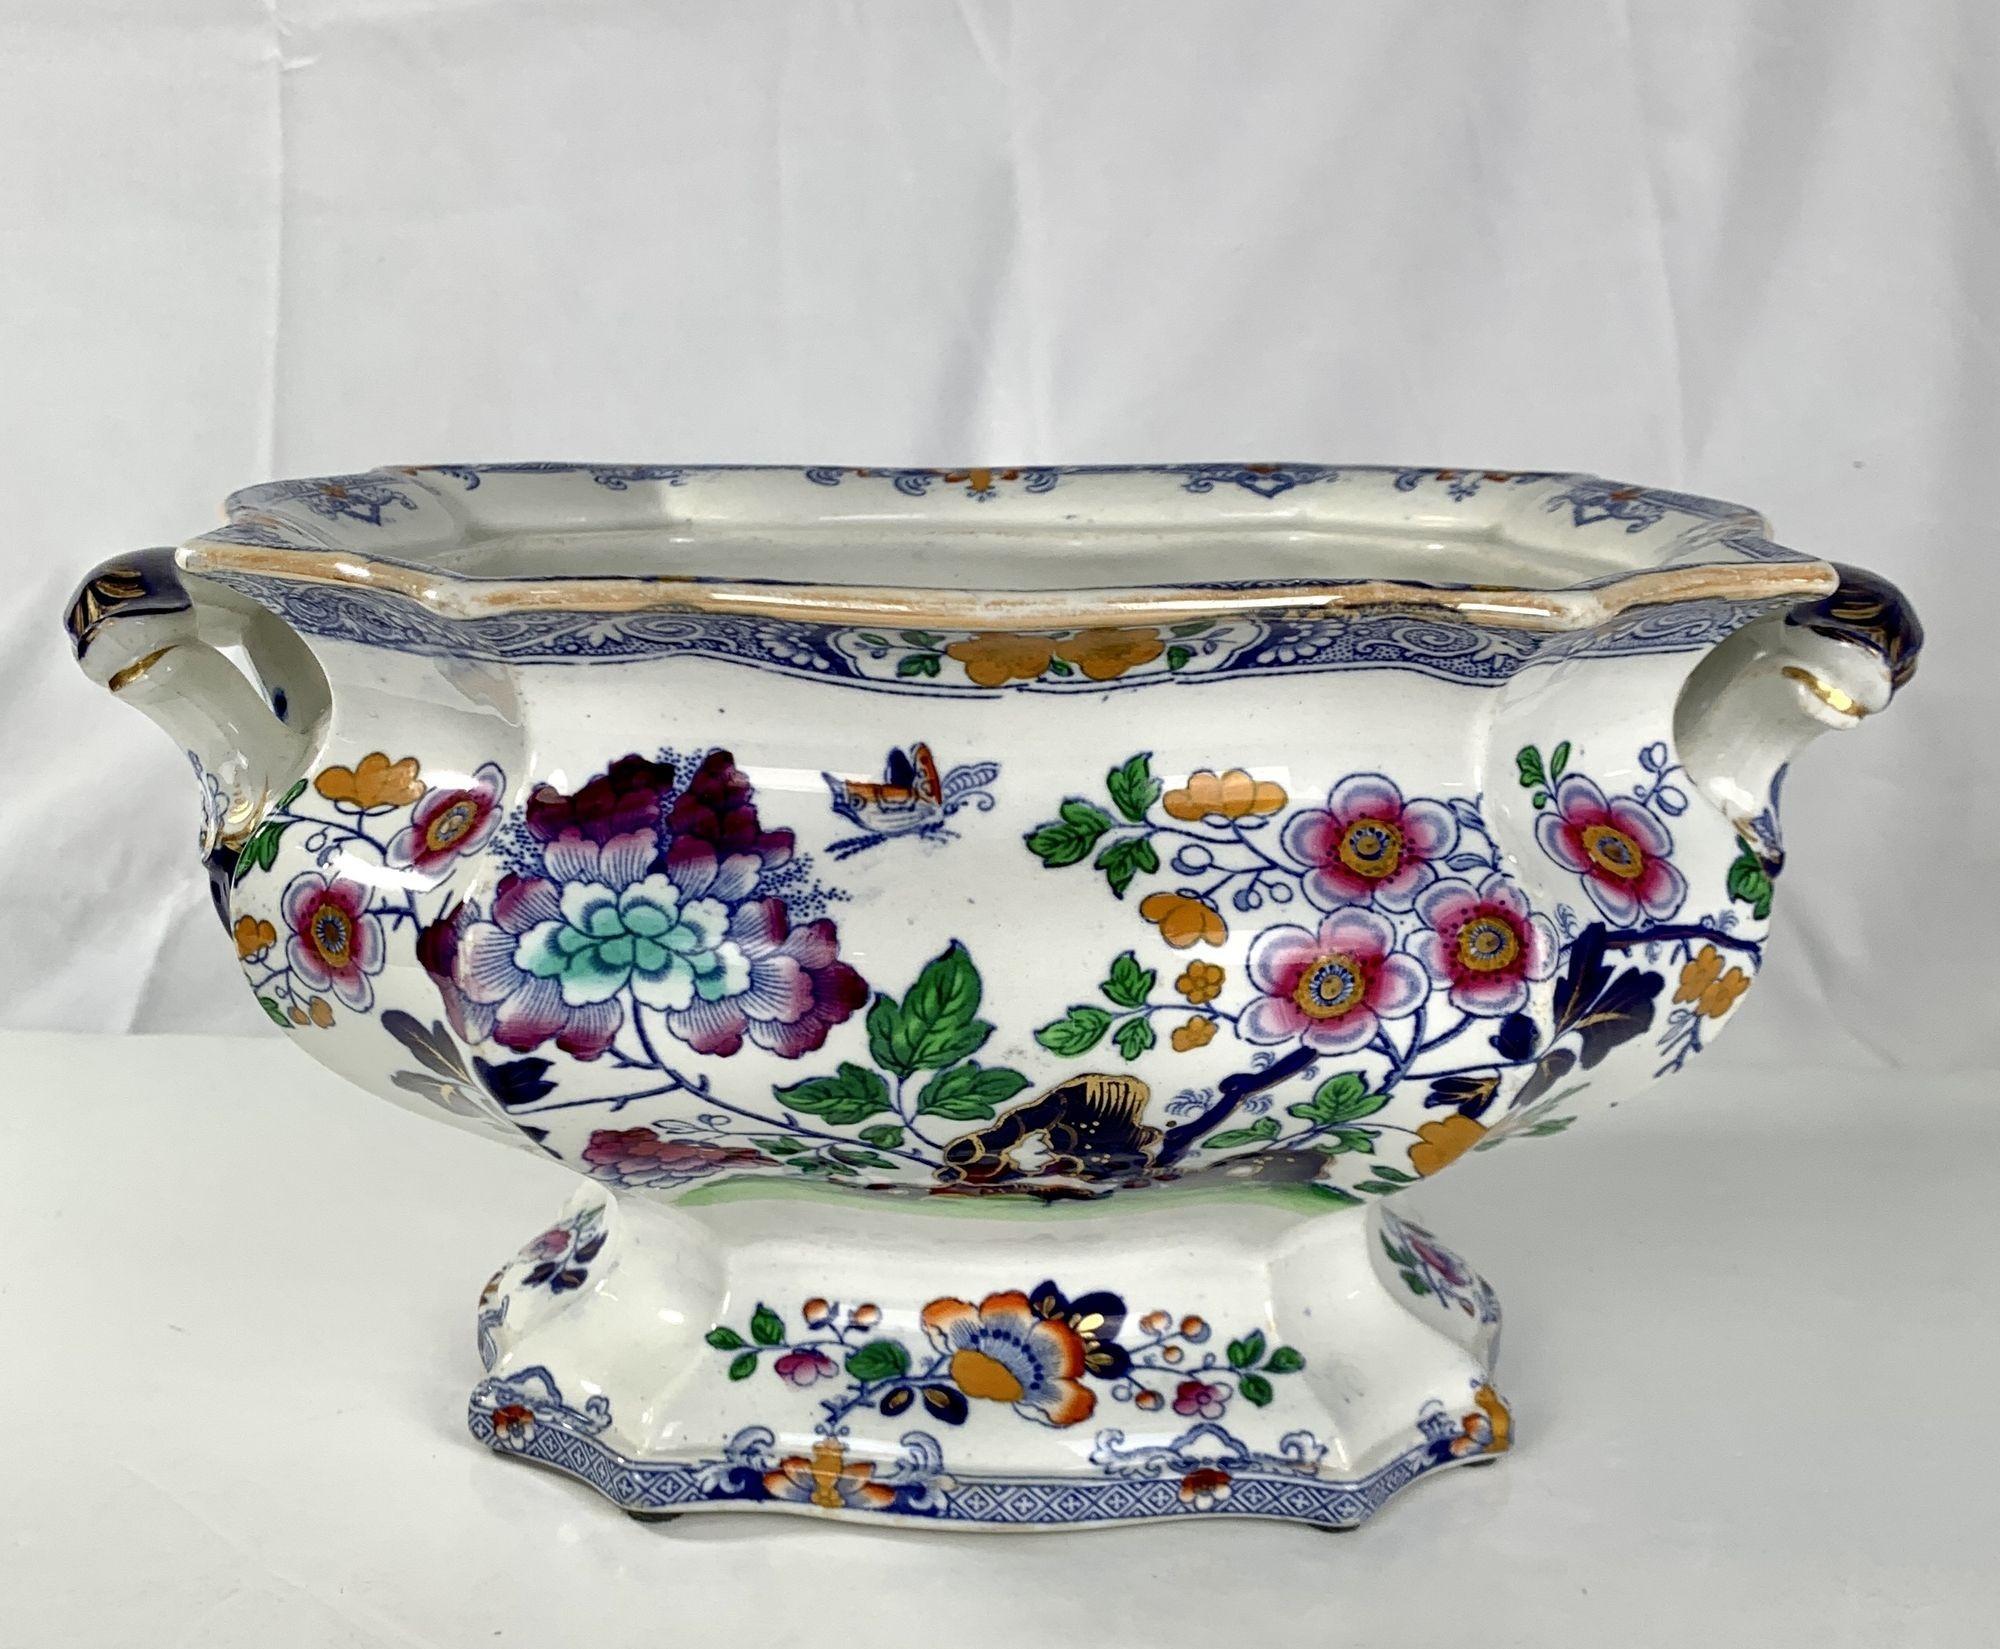  Made by Hicks and Meigh circa 1820, this lovely tureen is perfect for flowers. 
The lively decoration is full of color. 
We see a butterfly hovering above a flower-filled garden.
Pink fruit tree blossoms and purple peonies rise above cobalt blue